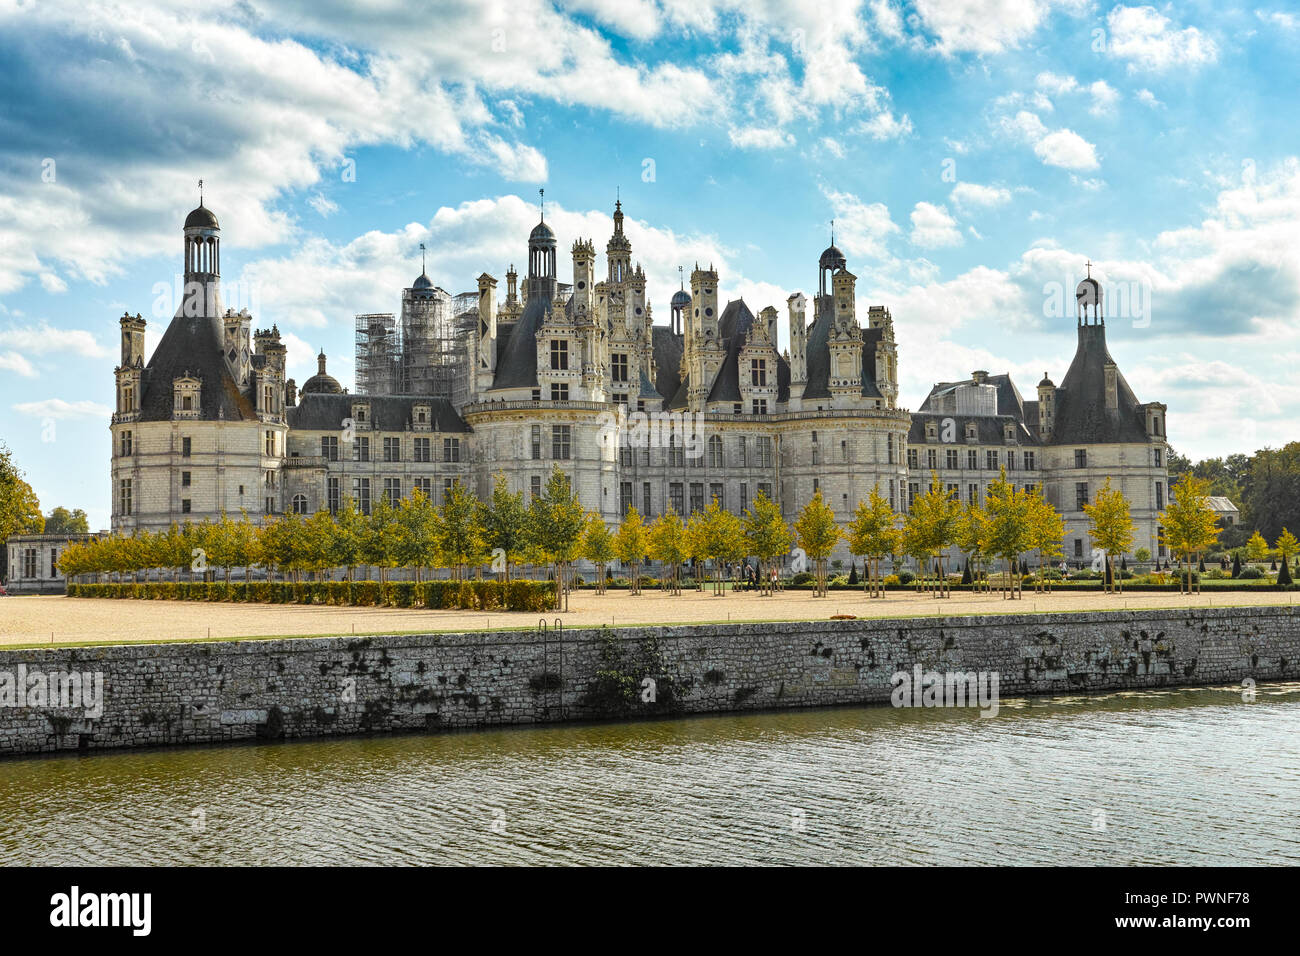 Chateau de Chambord, french castle in Loire Valley, France Stock Photo